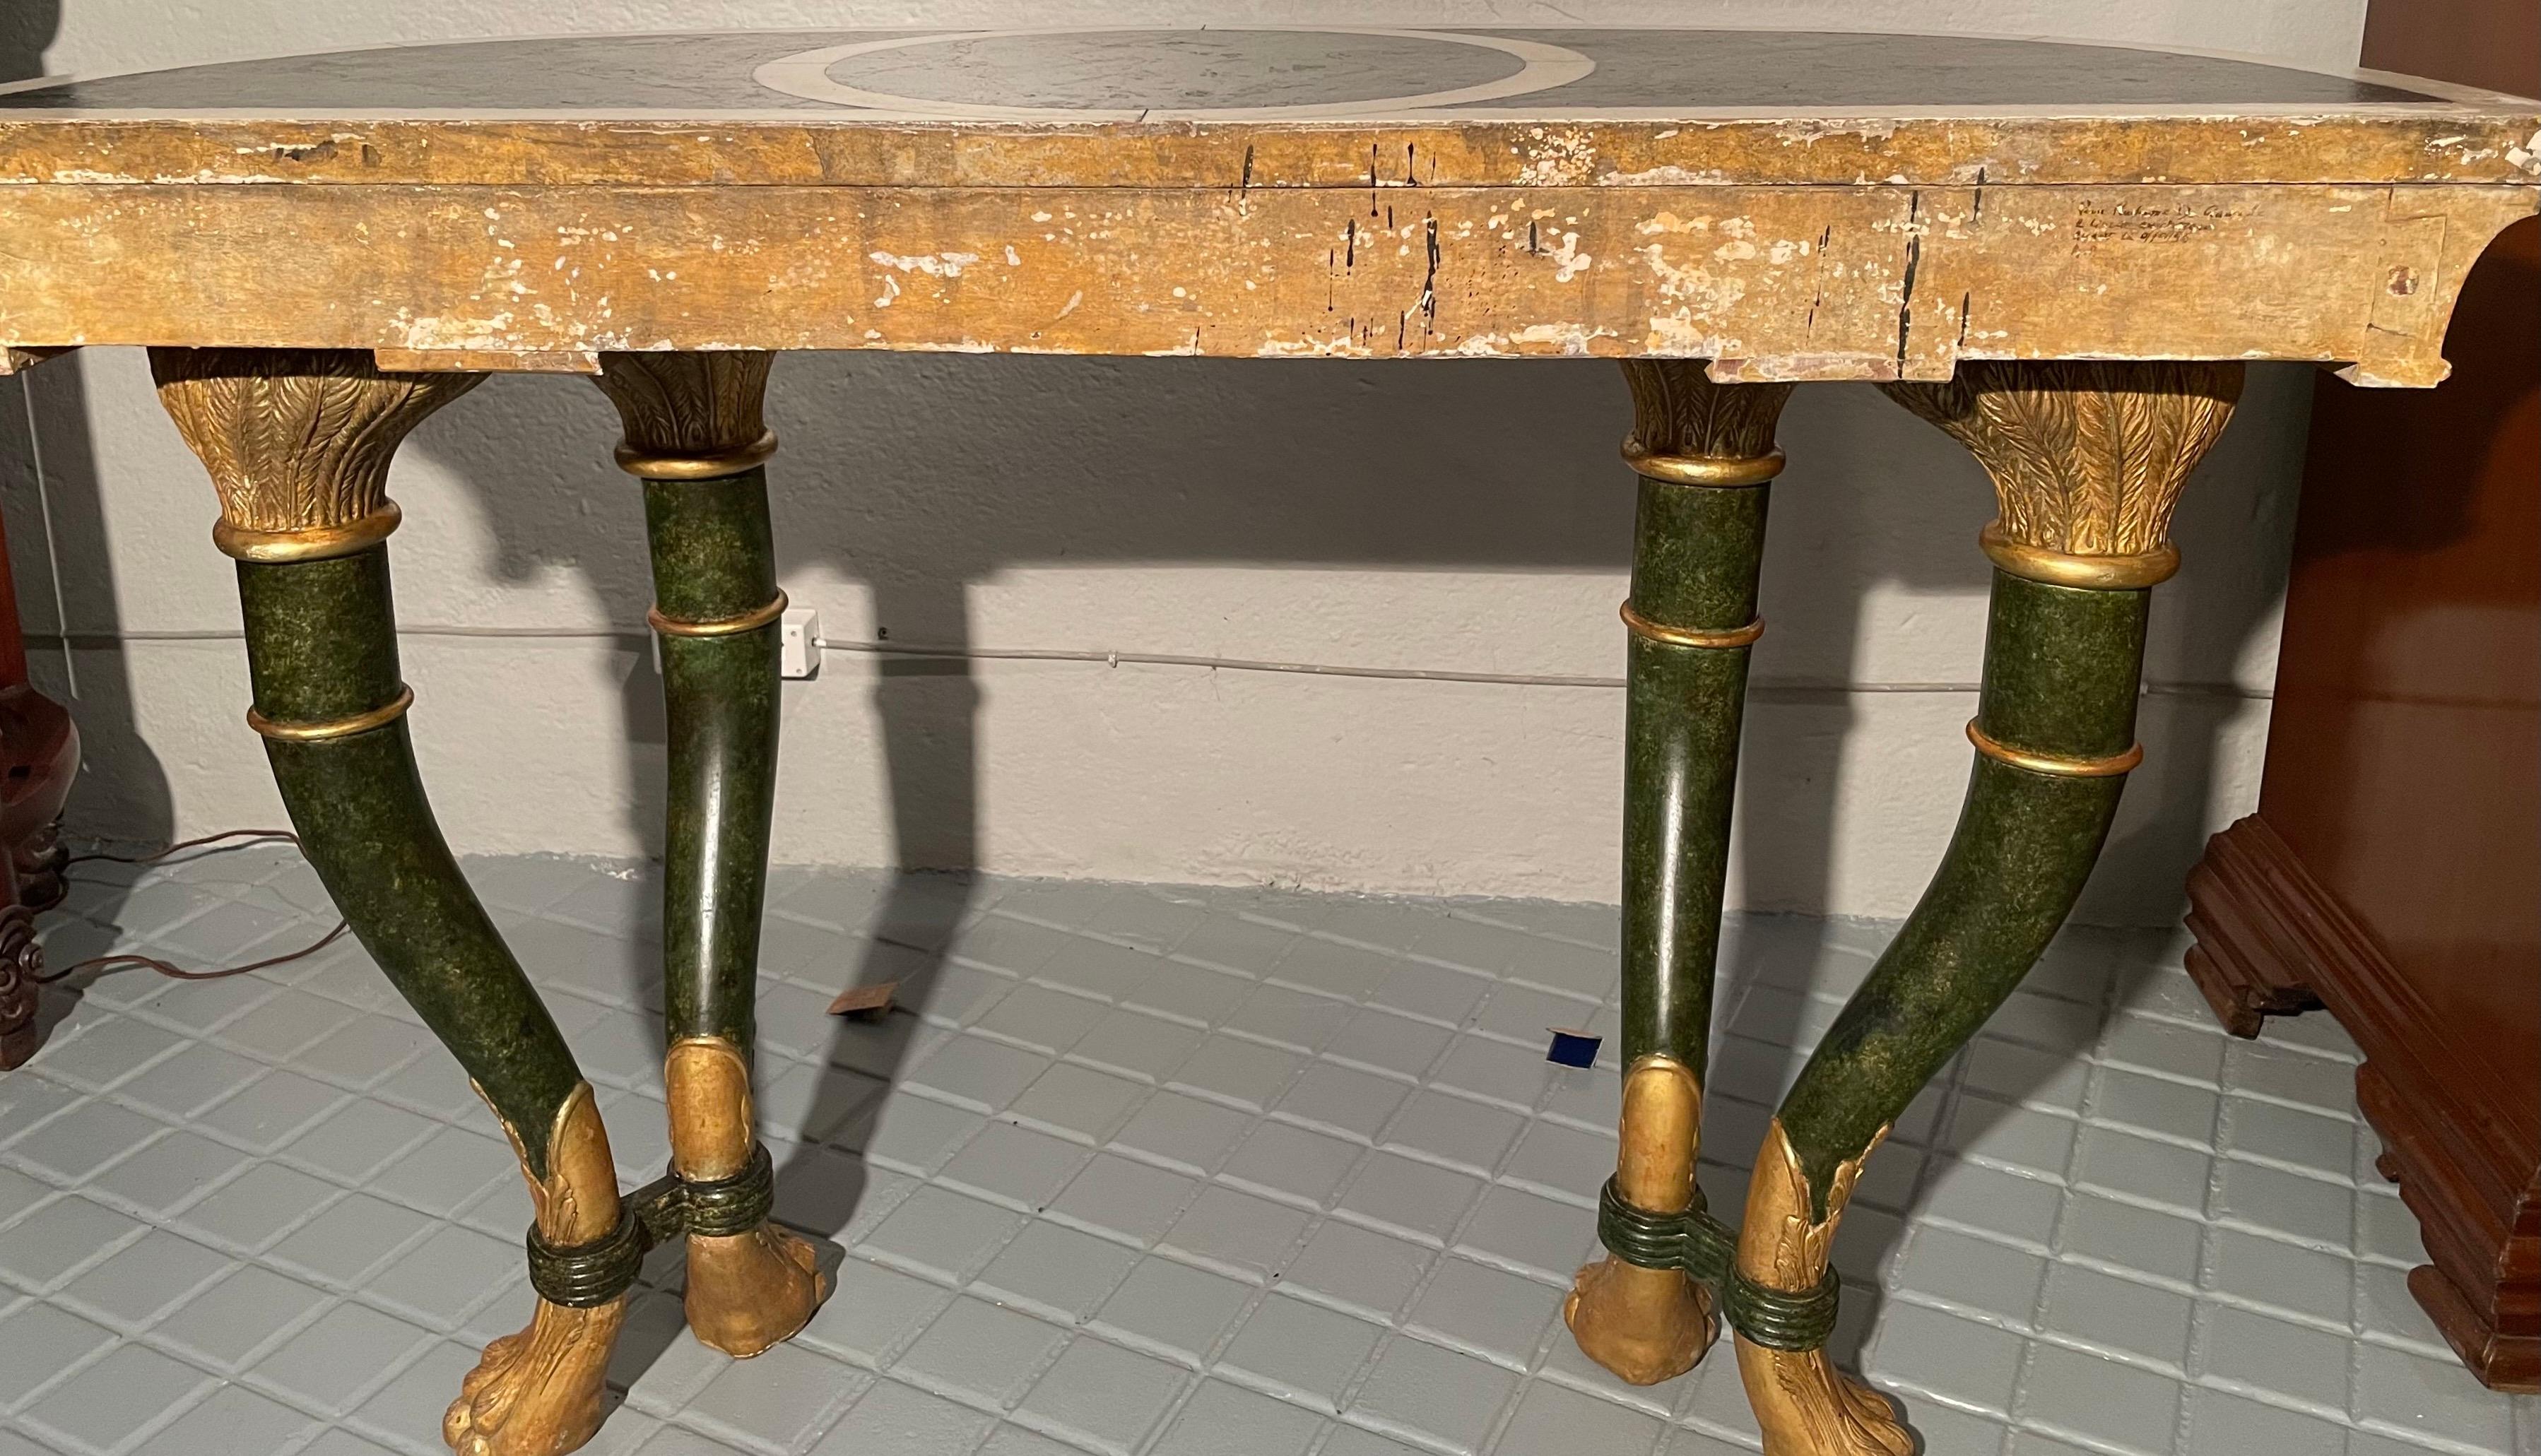 Pair of Sicilians Consoles Made of Wood with Gilding and Stucco, 19th Century For Sale 7